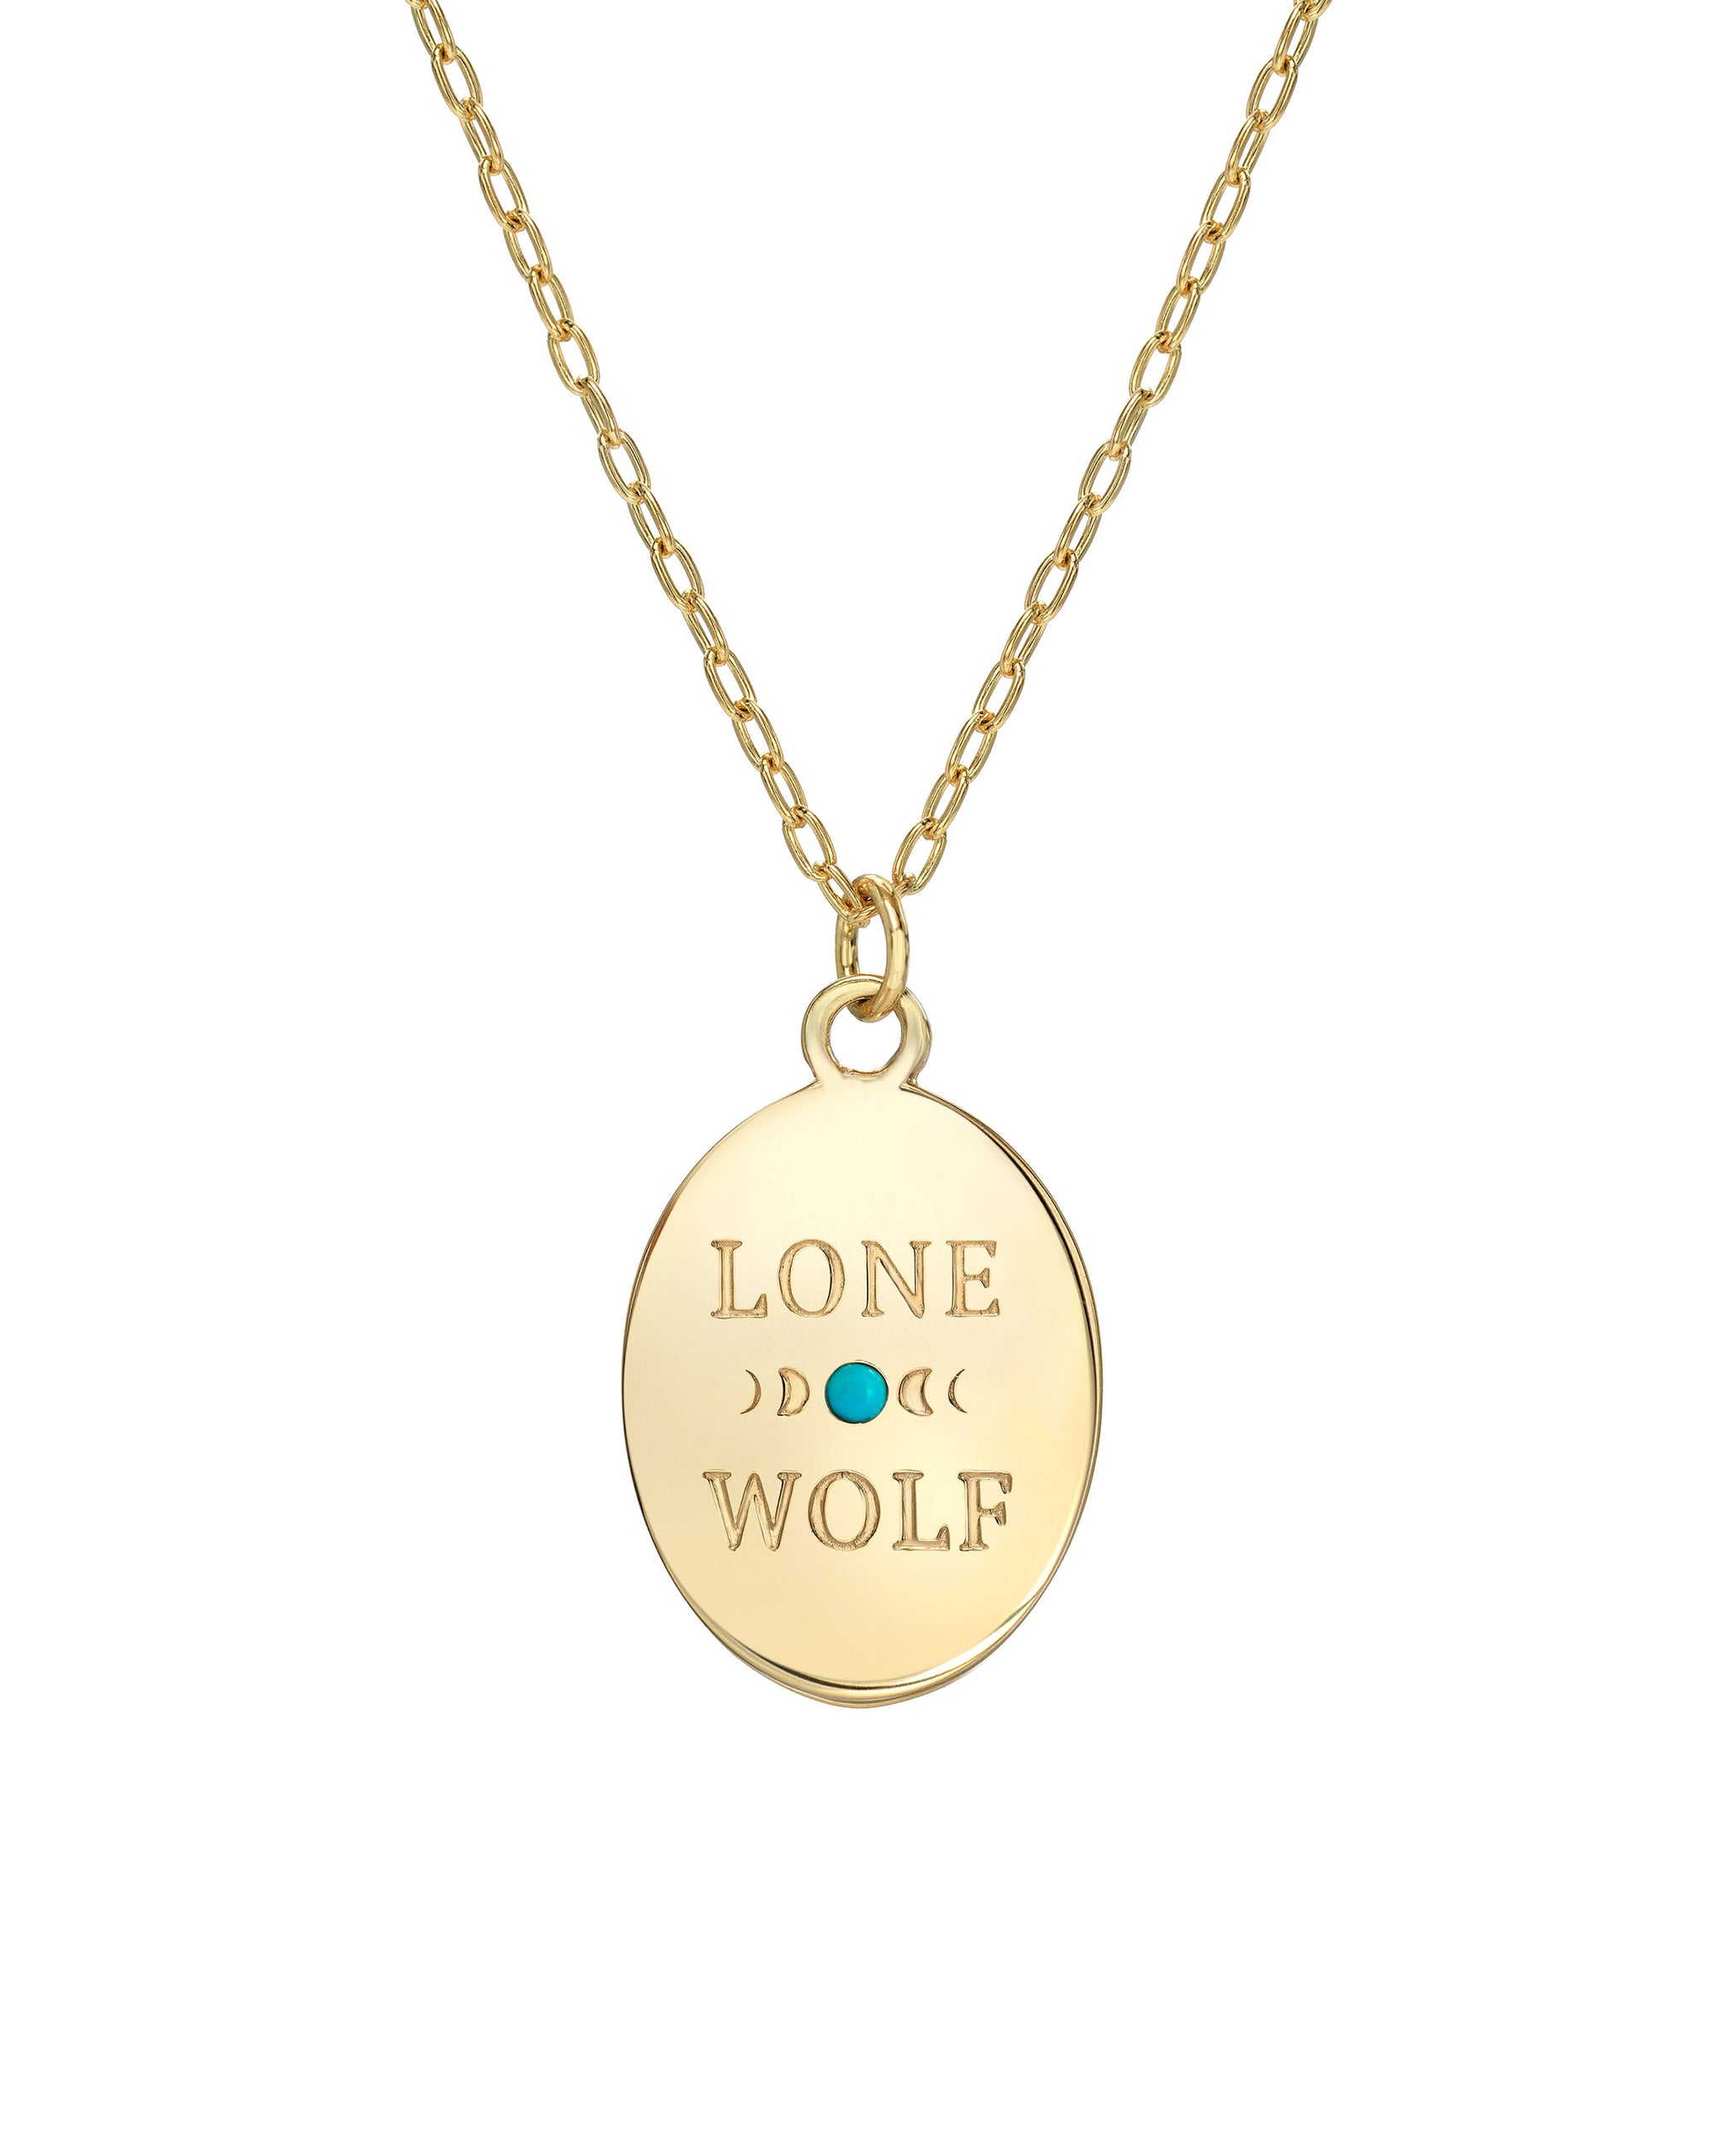 Lone Wolf Necklace, Sleeping Beauty Turquoise and 14k Gold vermeil on a 167"-18" Adjustable Chain, Handmade in Los Angeles by Turquoise and Tobacco